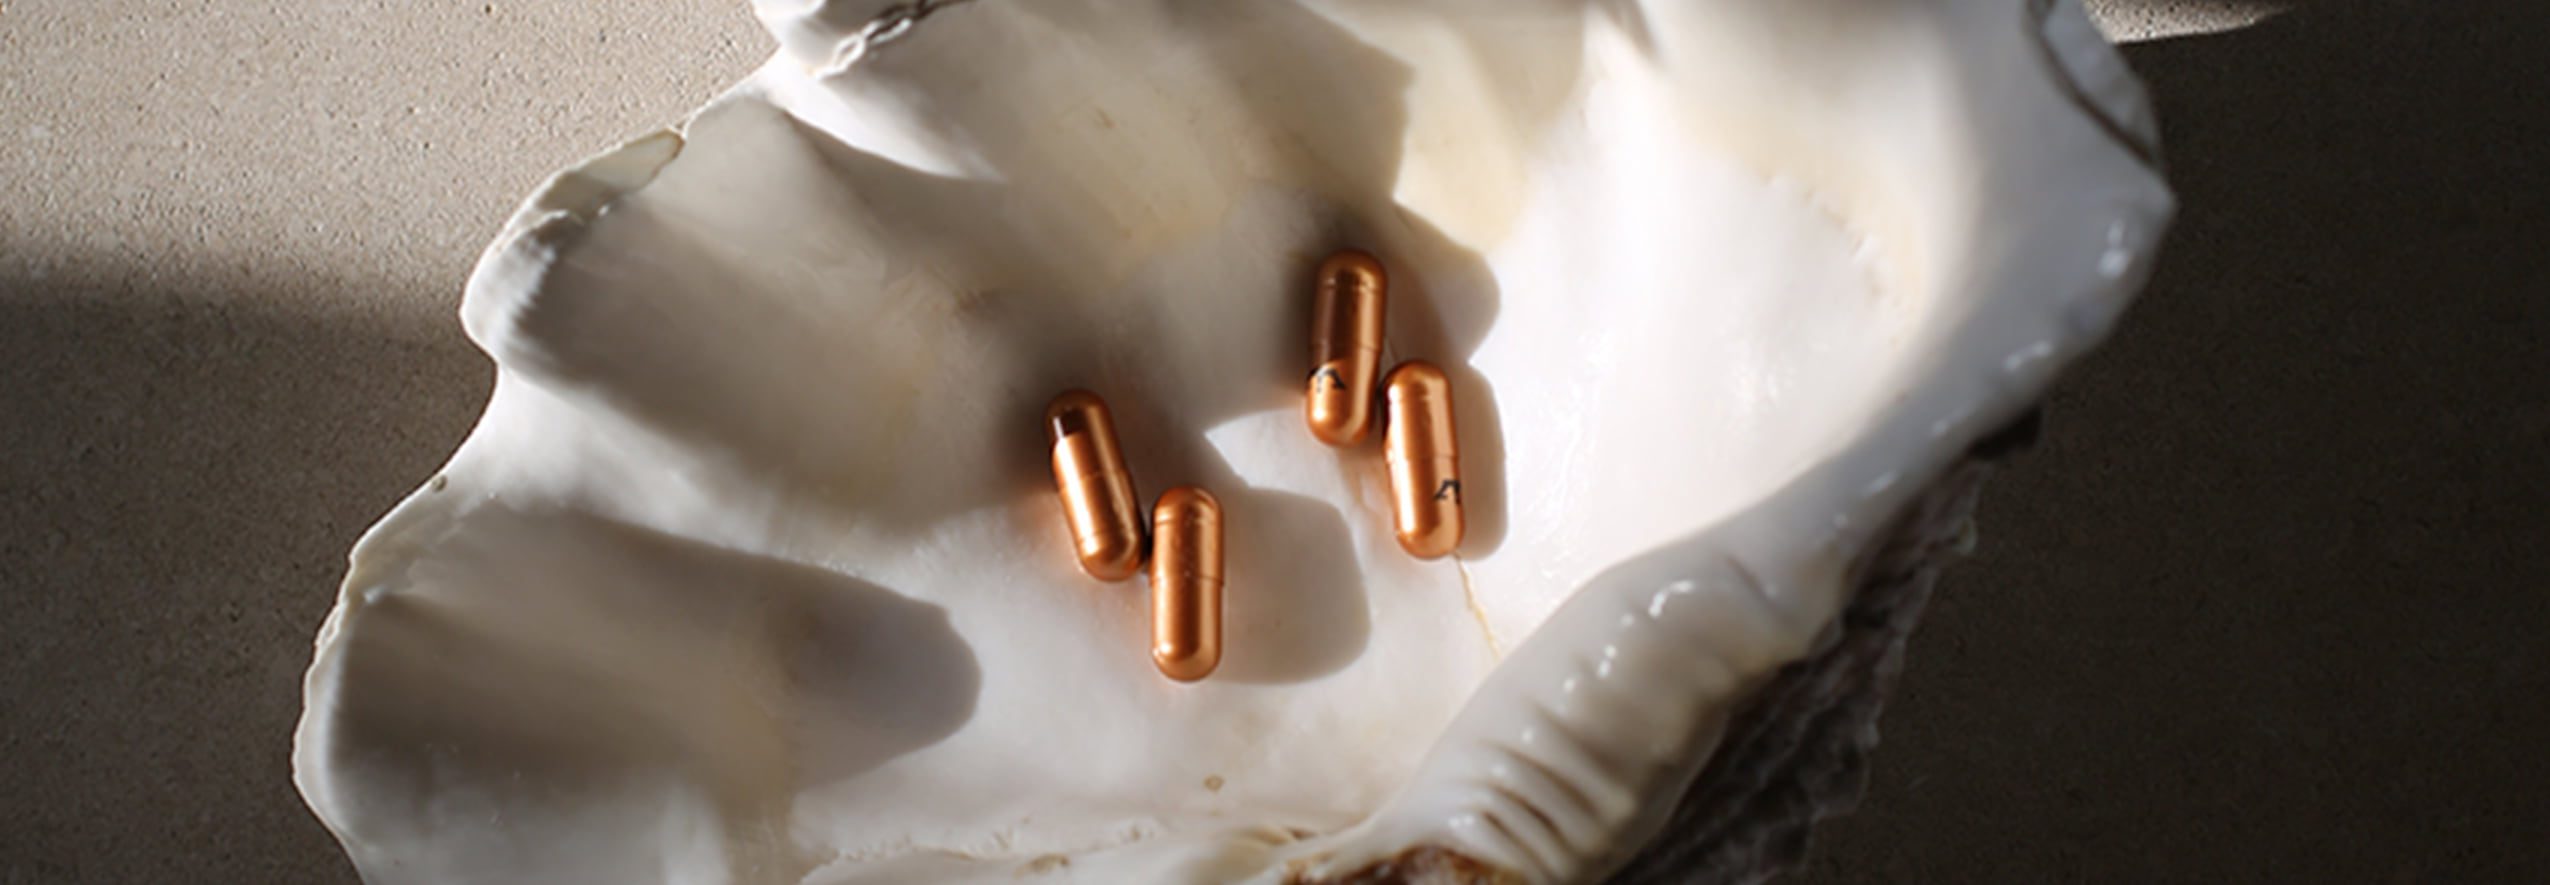 LYMA Energy Supplements - pills in shell